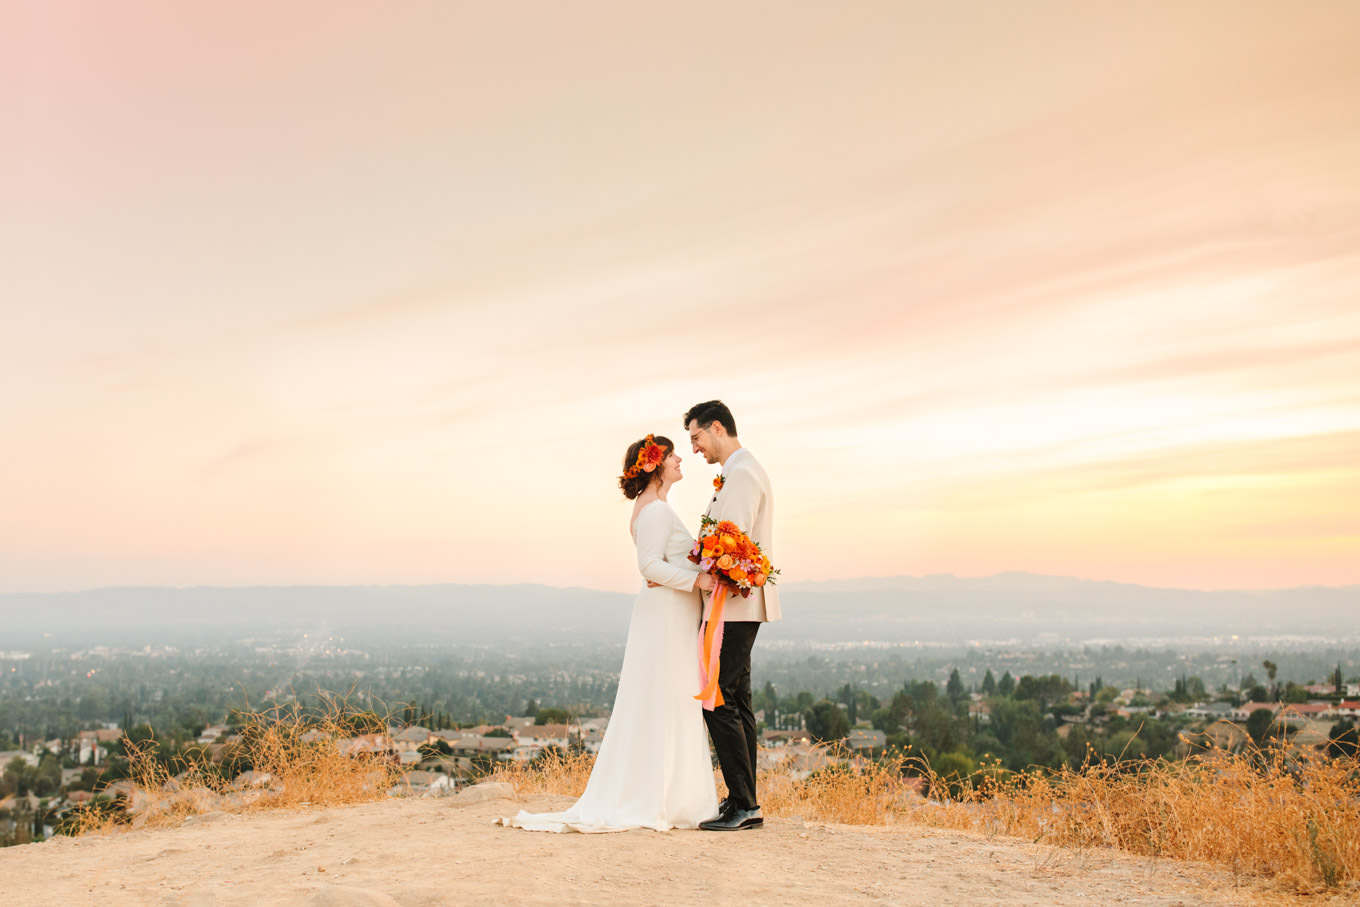 Gorgeous bride and groom photo with ocean views | Vibrant backyard micro wedding featured on Green Wedding Shoes | Colorful LA wedding photography | #losangeleswedding #backyardwedding #microwedding #laweddingphotographer Source: Mary Costa Photography | Los Angeles